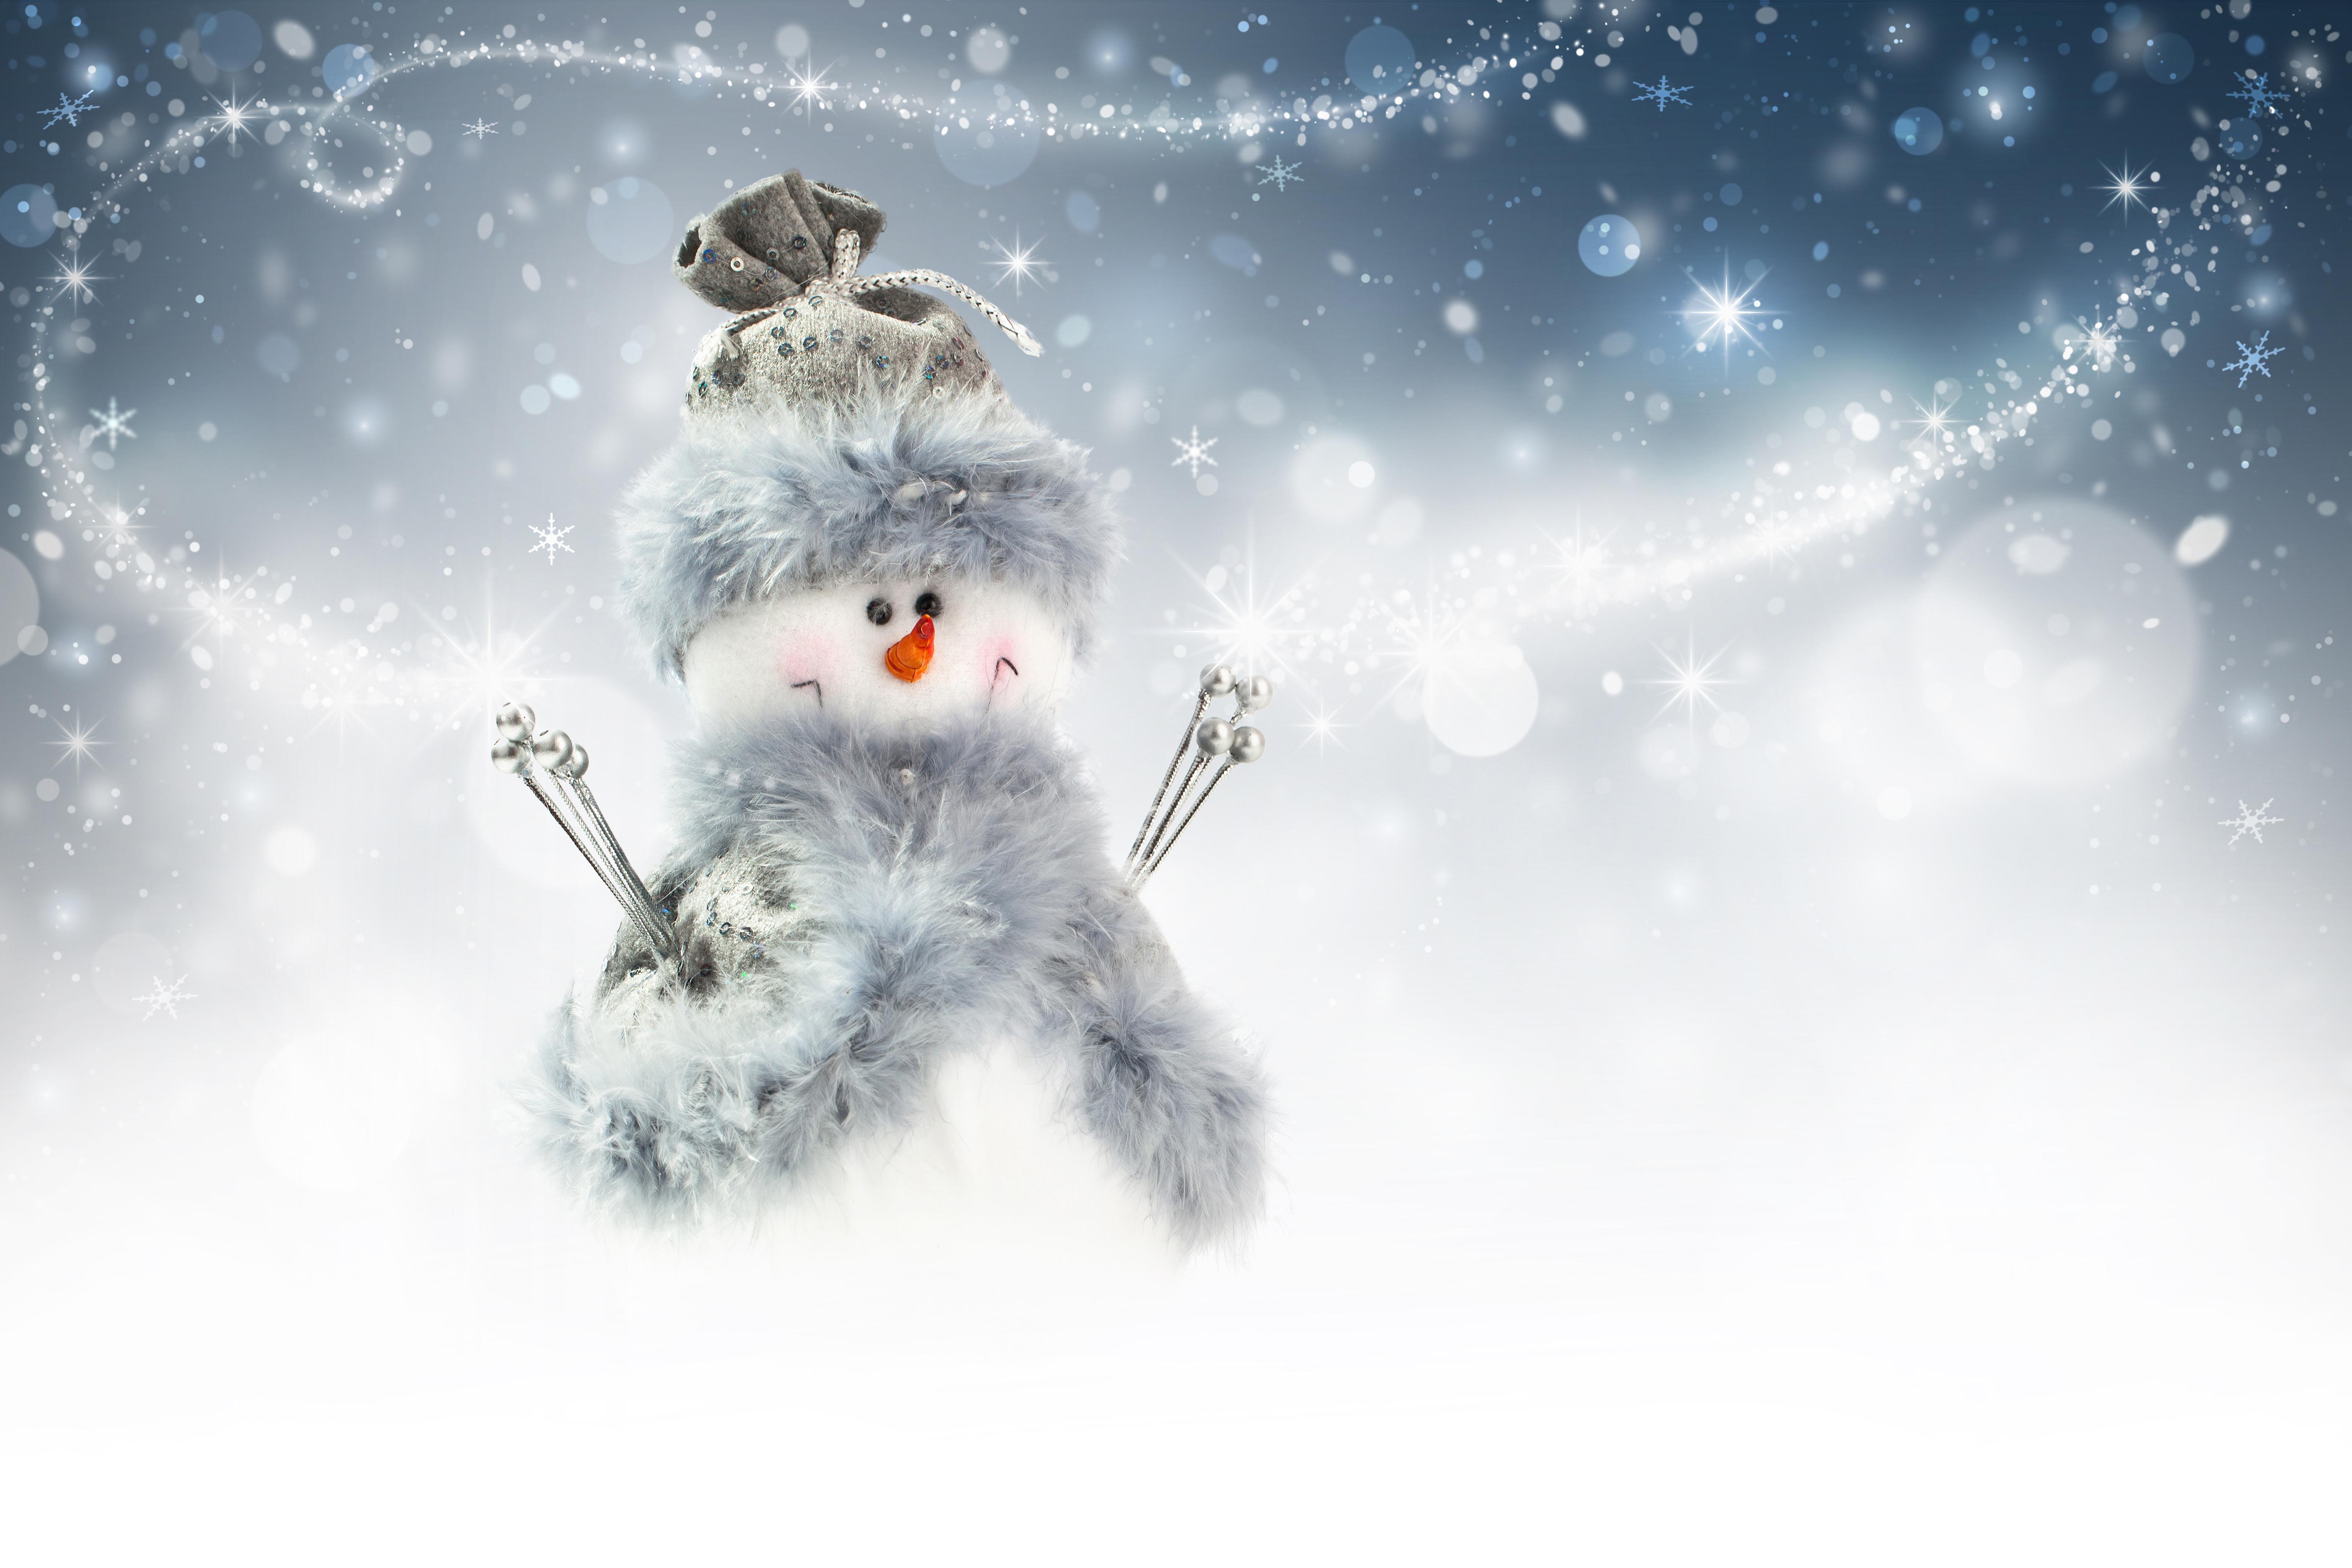 Free download trees mountains christmas new year snow snow snowman winter [5616x3744] for your Desktop, Mobile & Tablet. Explore Winter Snowman Wallpaper. Snowman Wallpaper Free, Country Snowman Wallpaper, Funny Snowman Wallpaper